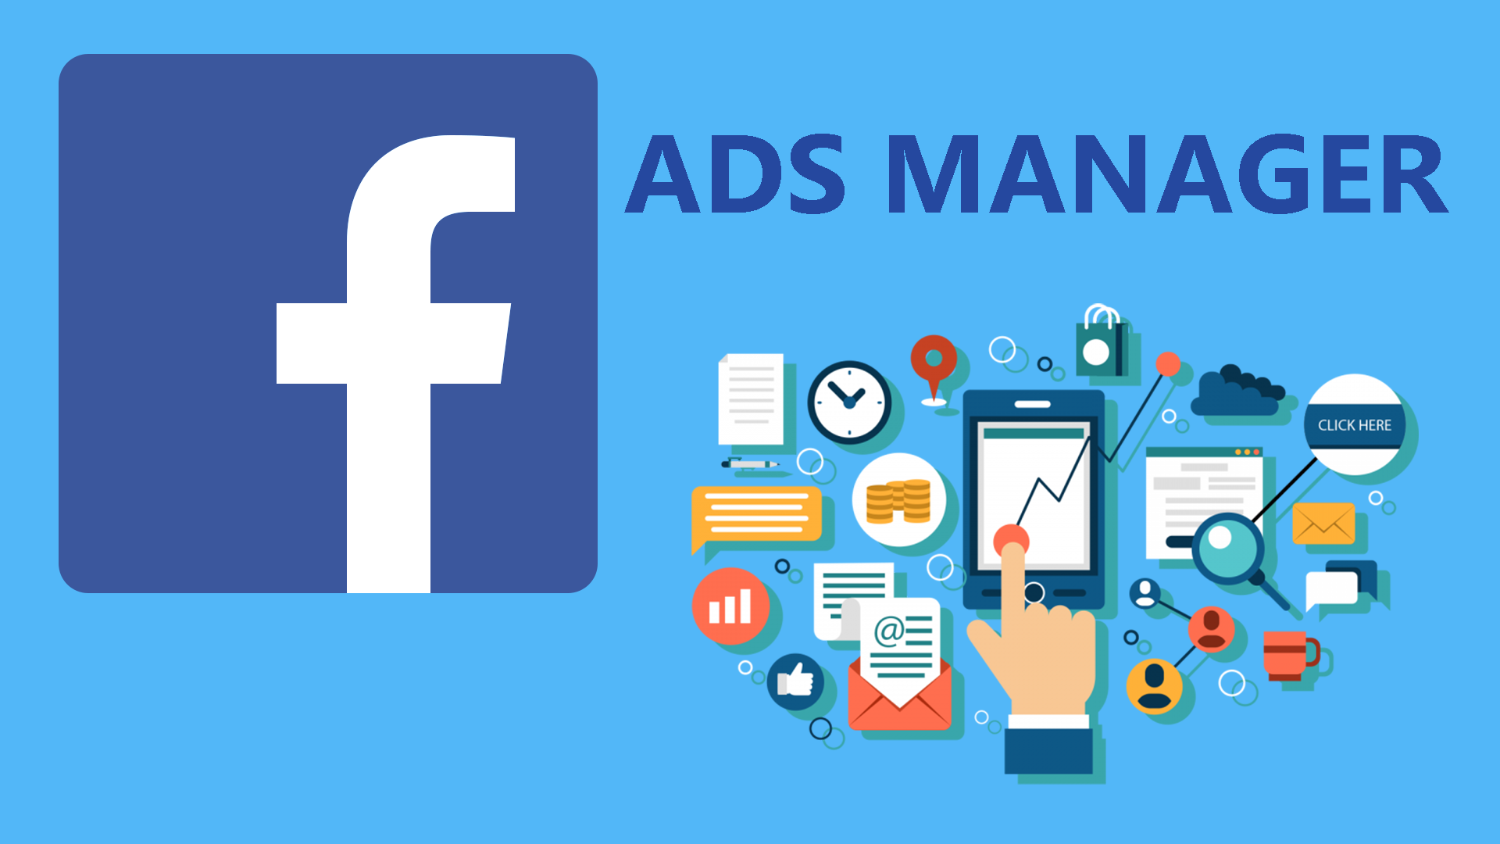 How-to-use-Facebook-ads-manager-to-grow-your-business-featured-image (1)